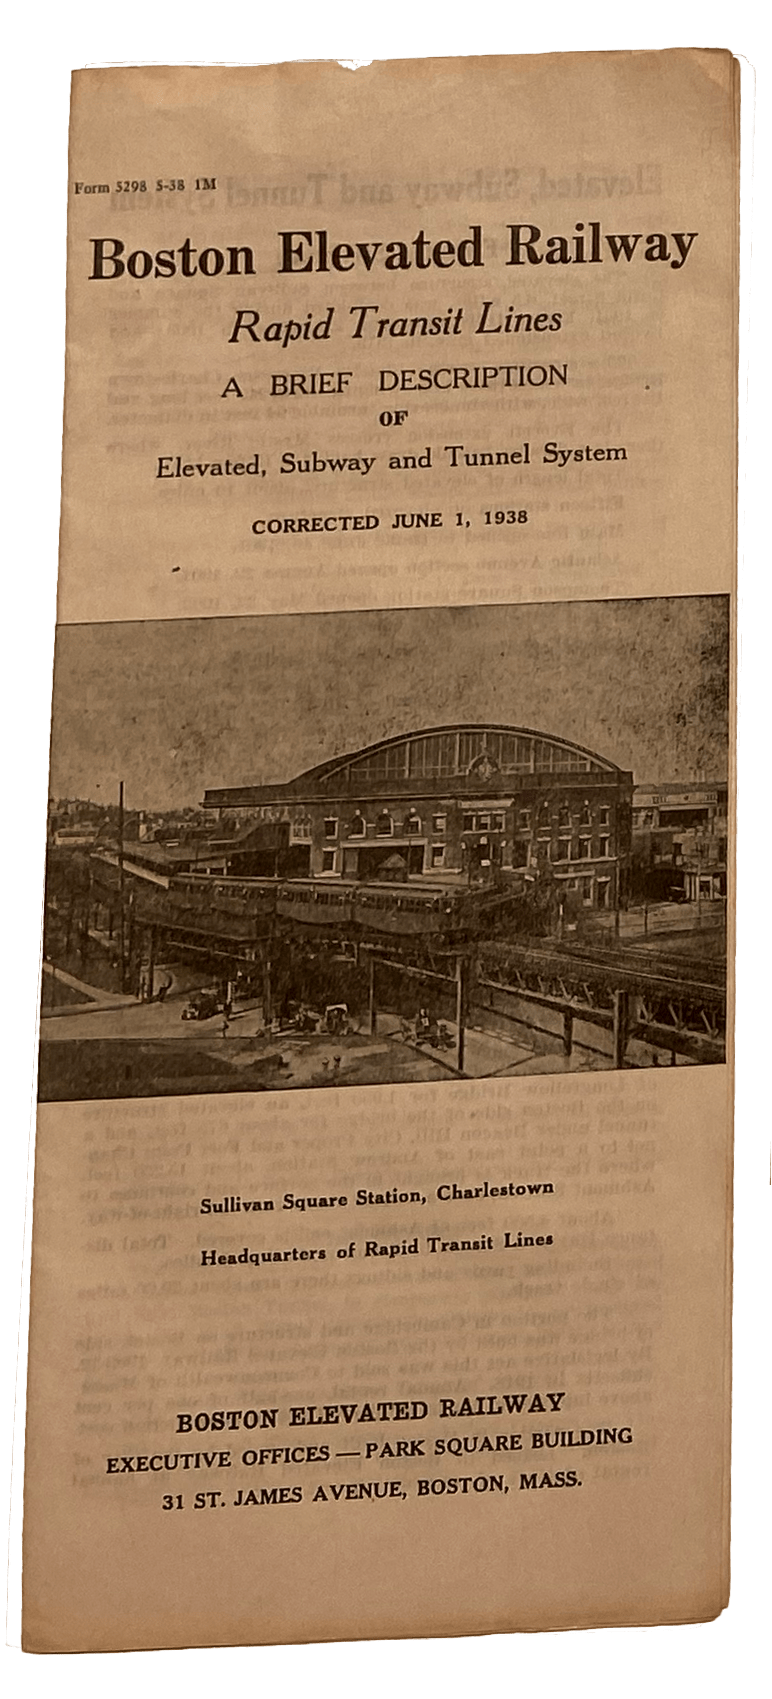 Image of Boston Elevated Railway Rapid Transit Lines: A Brief Description of Elevated, Subway and Tunnel System: Corrected June 1, 1938